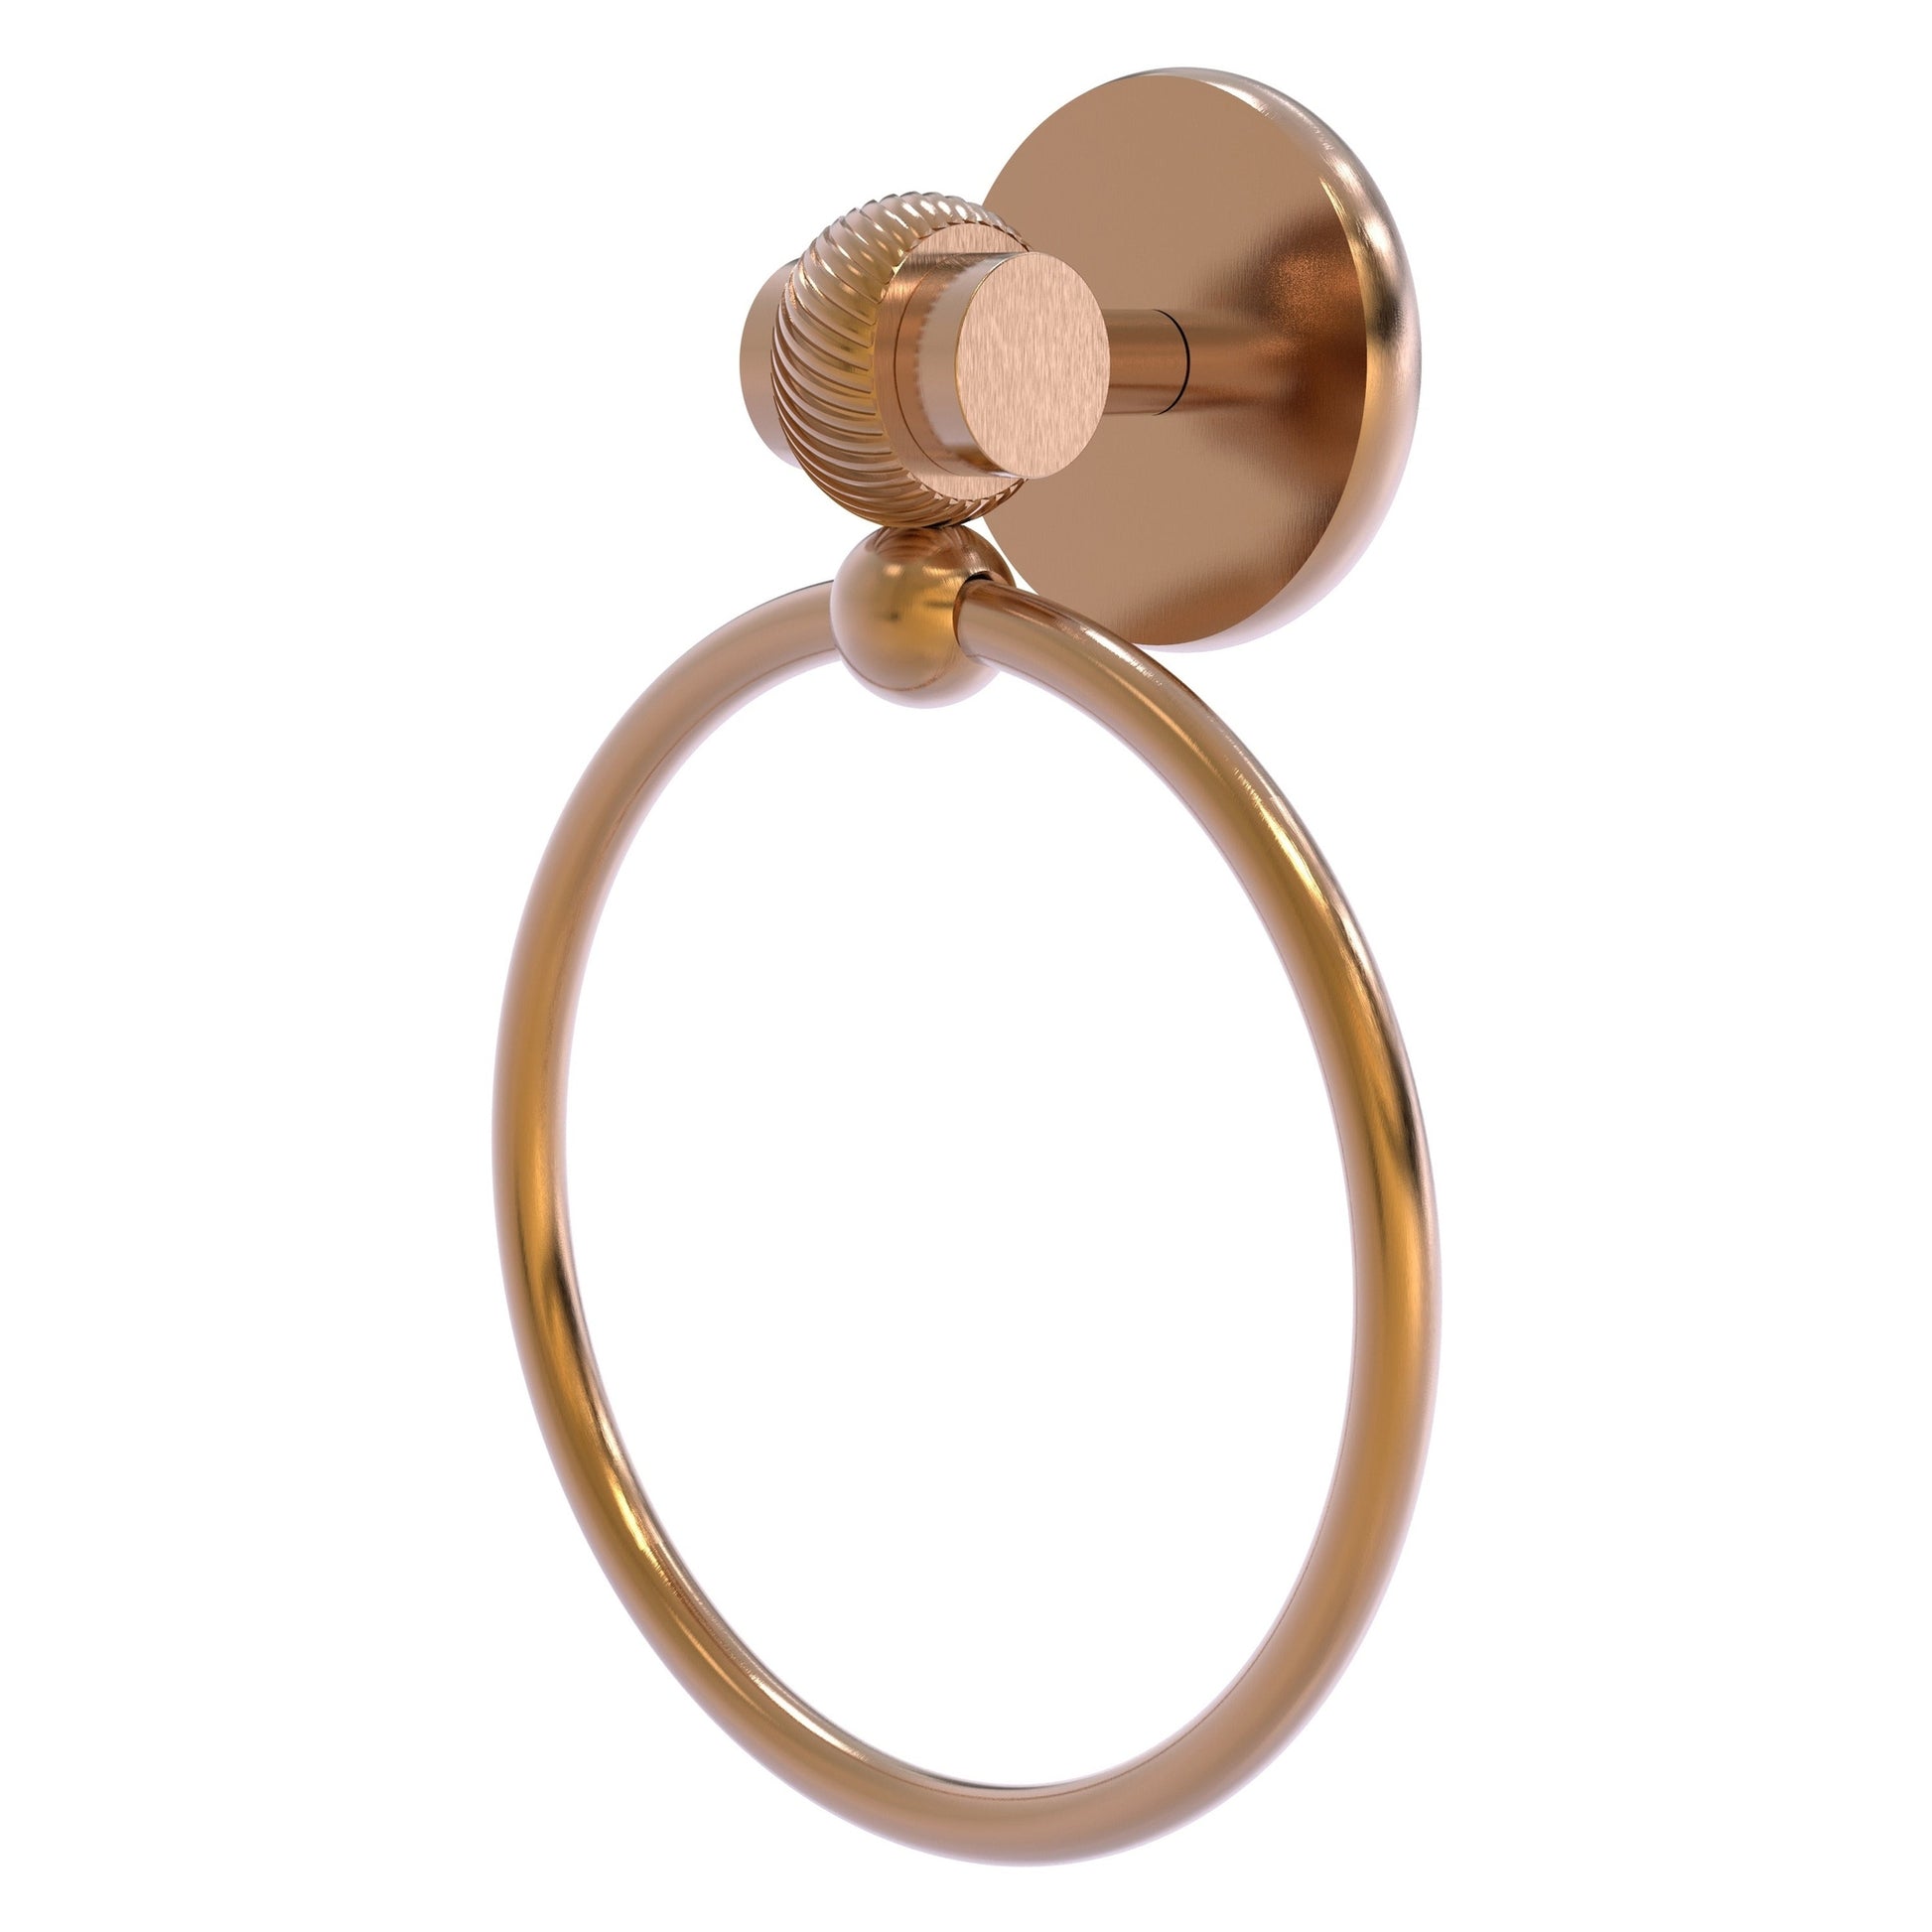 Allied Brass Satellite Orbit Two 6" x 3.5" Brushed Bronze Solid Brass Towel Ring With Twist Accent